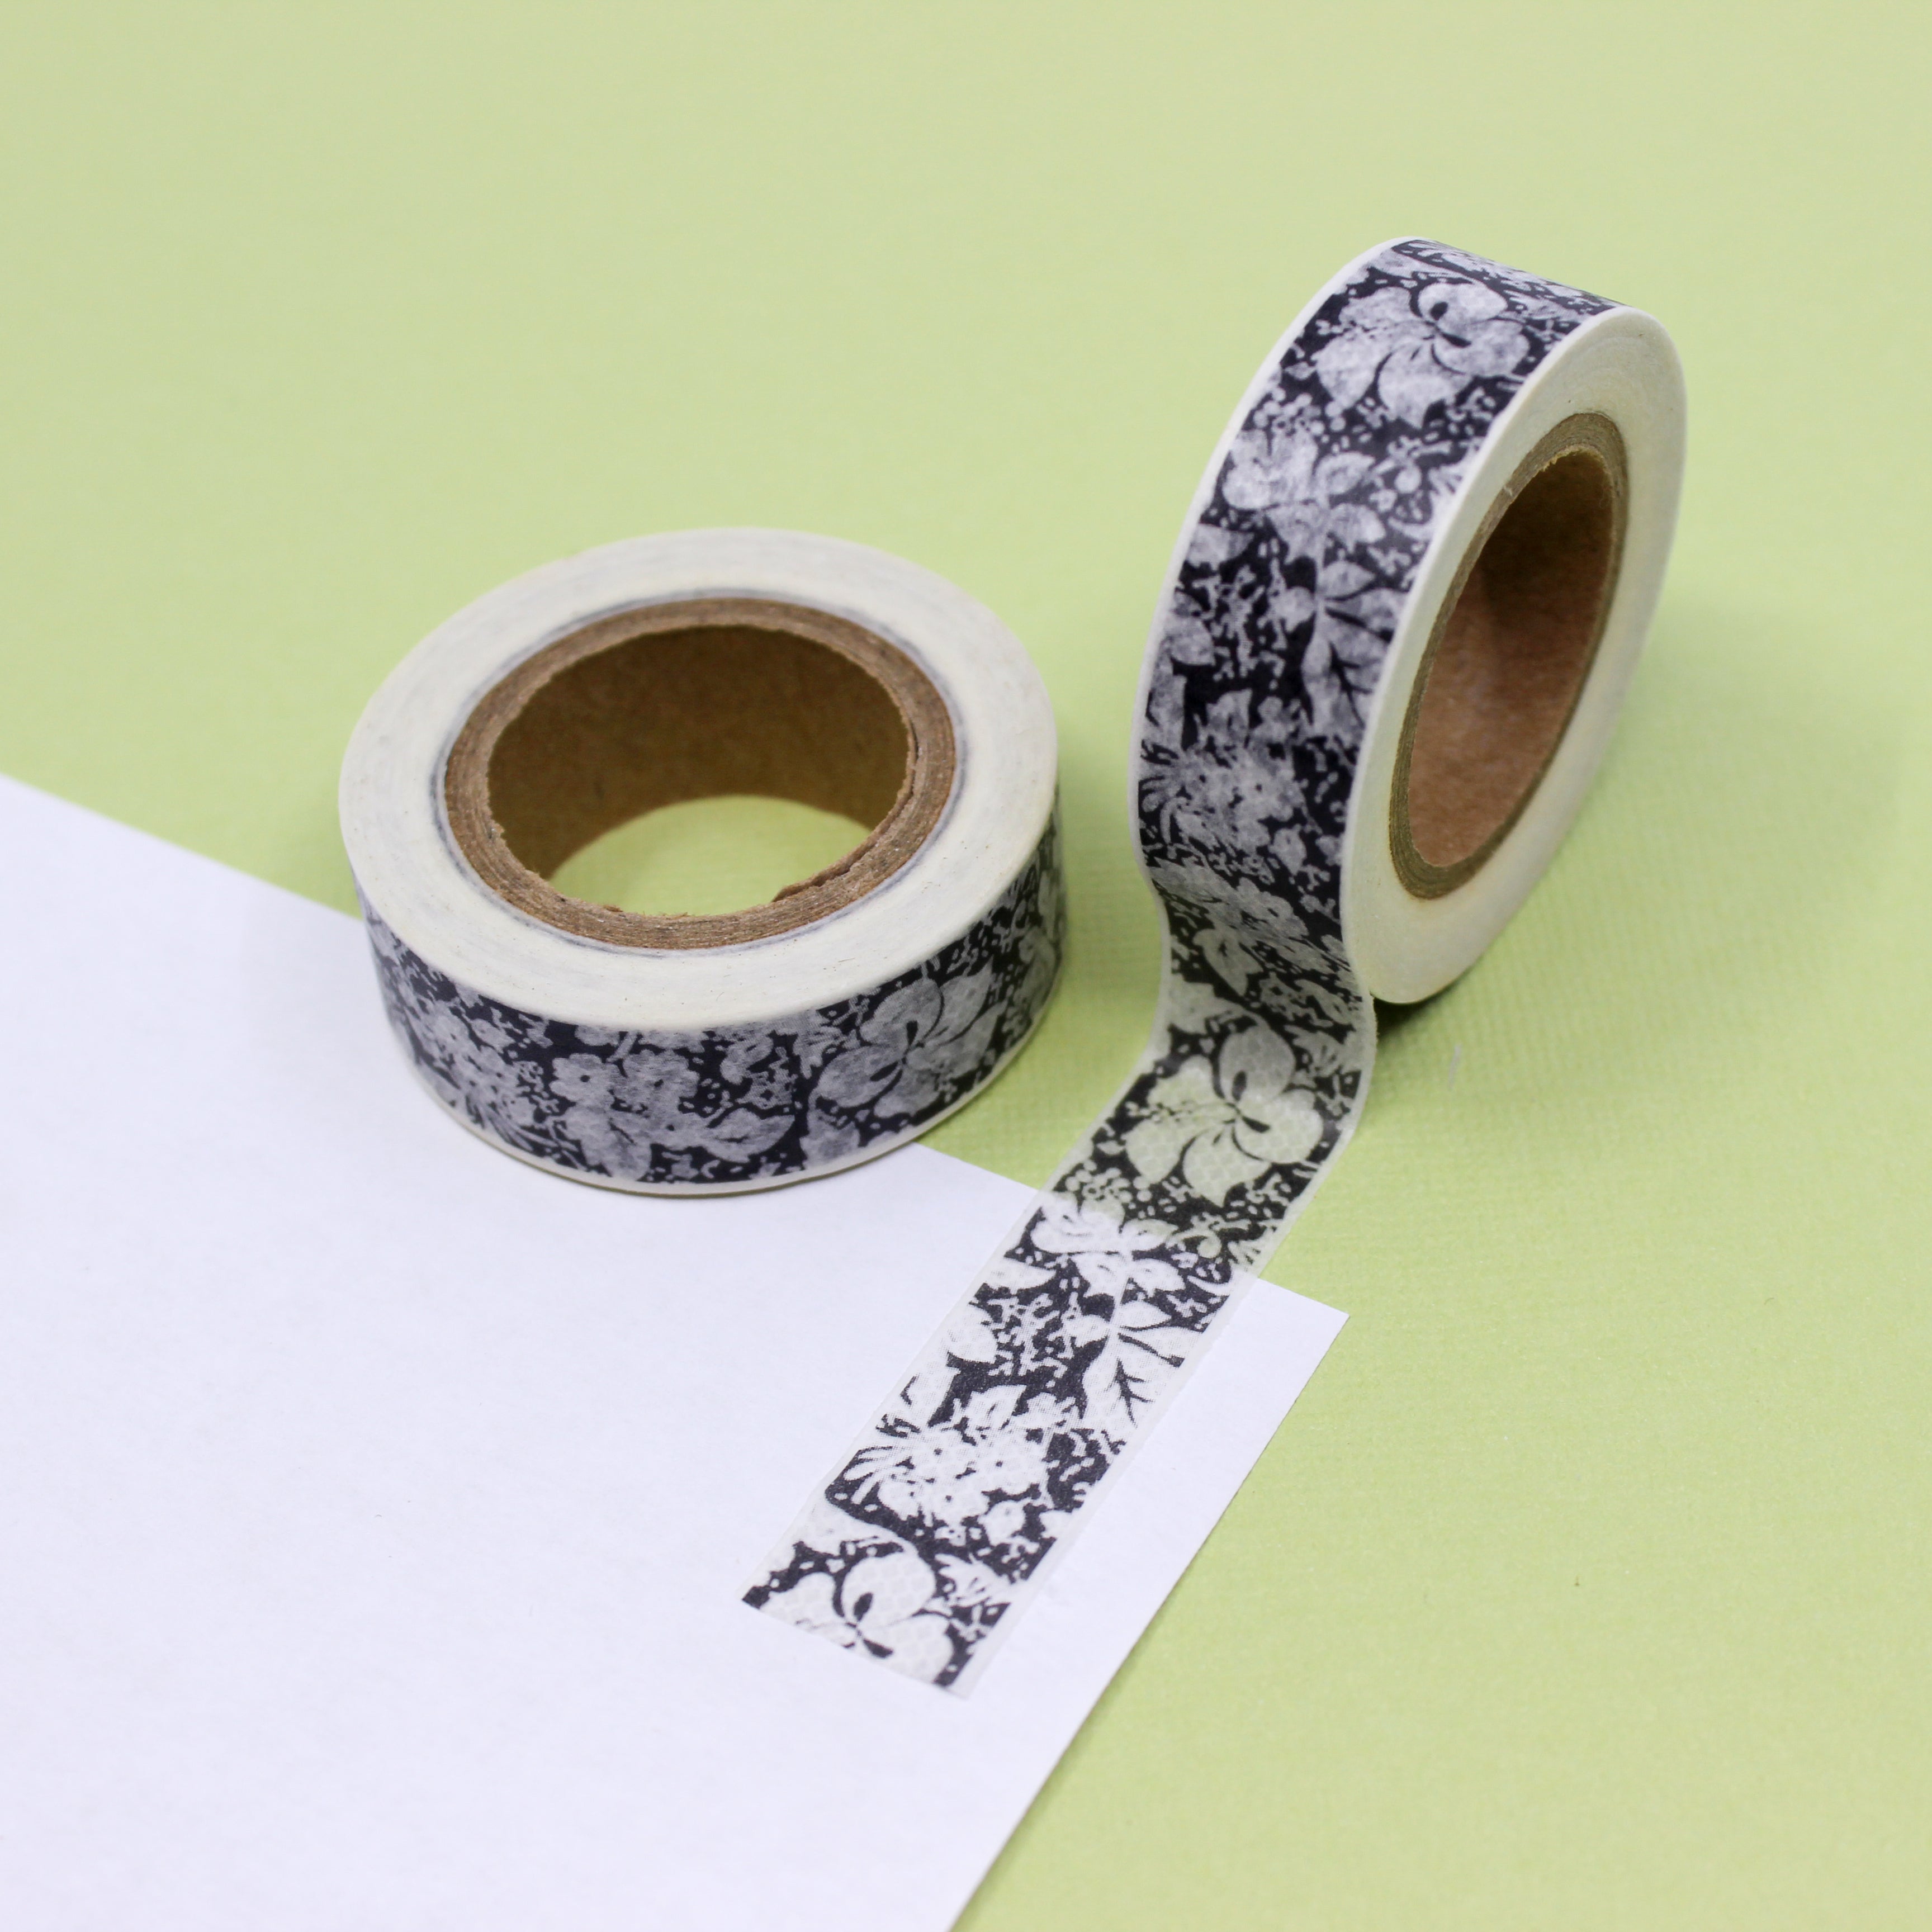 This is a black and white Hawaiian flowers washi tape from BBB Supplies Craft Shop